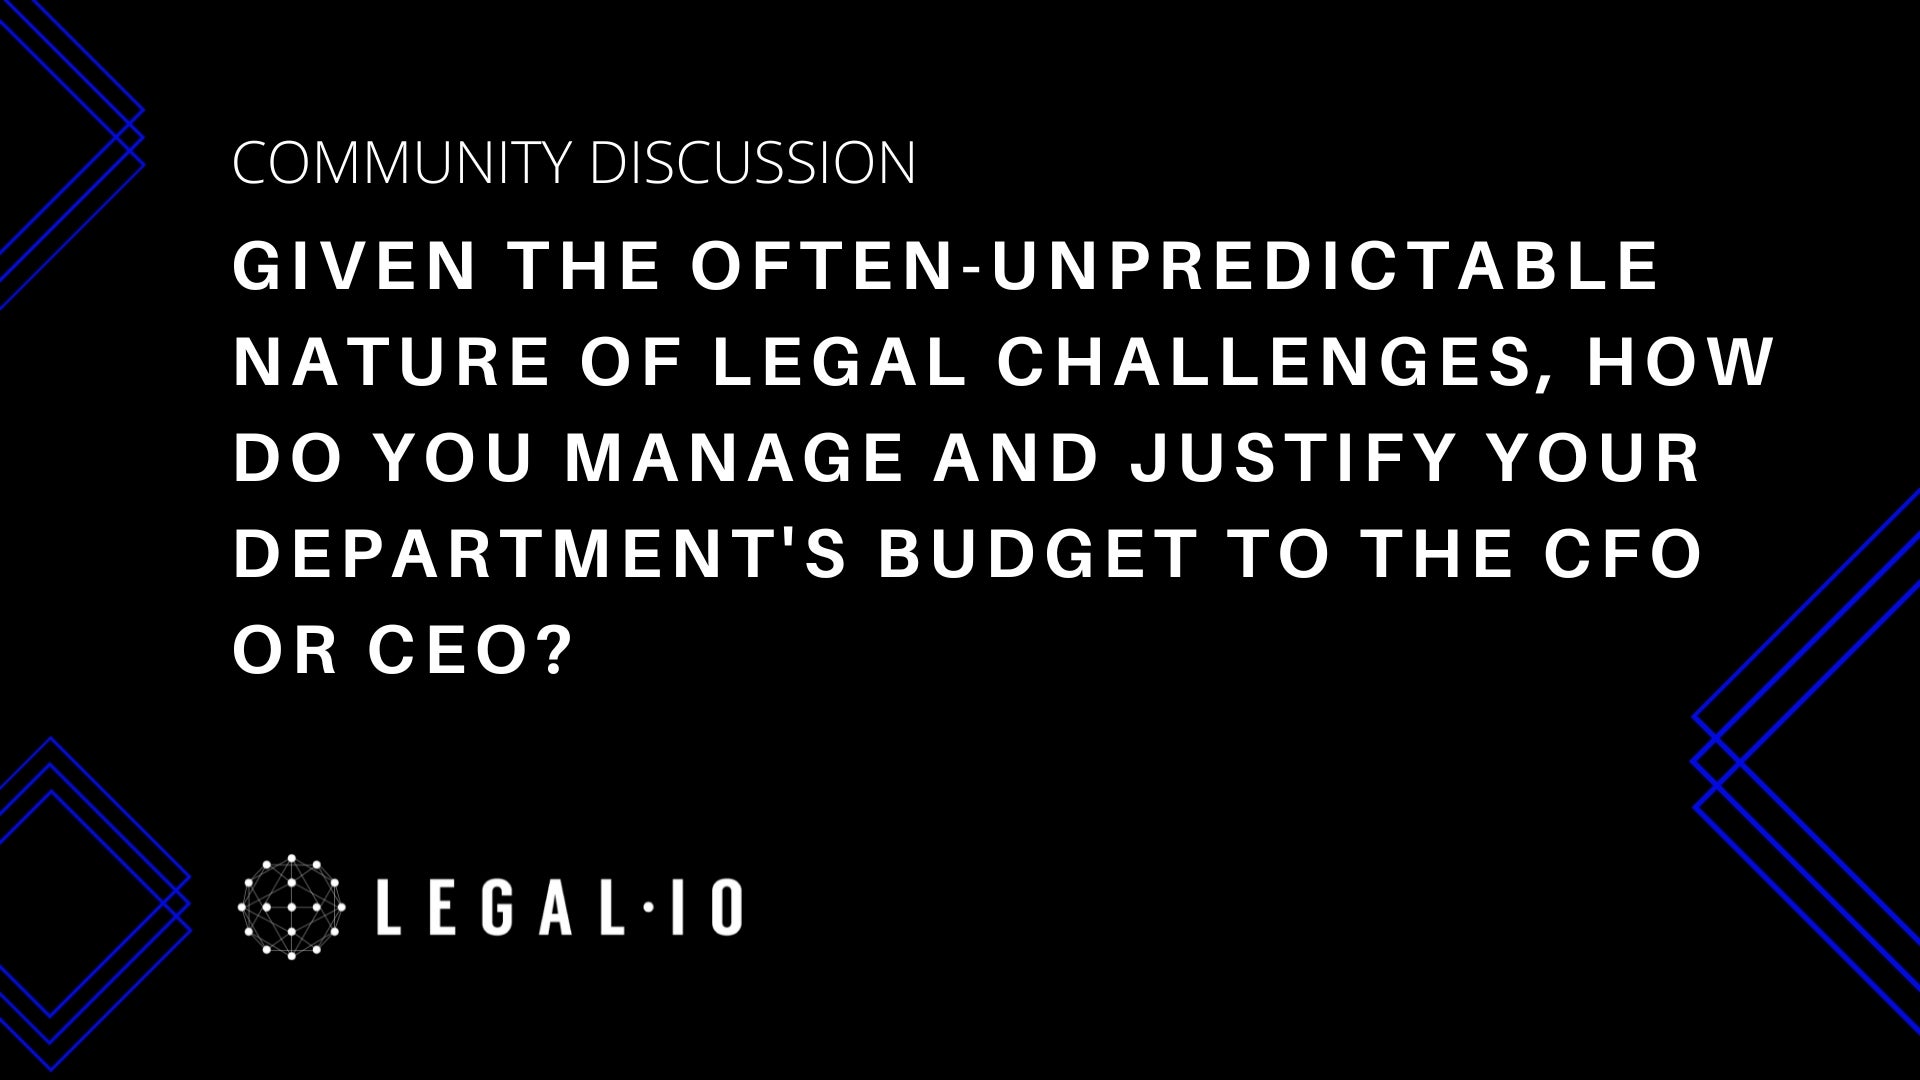 Community Discussion: Given the often-unpredictable nature of legal challenges, how do you manage and justify your department's budget to the CFO or CEO?